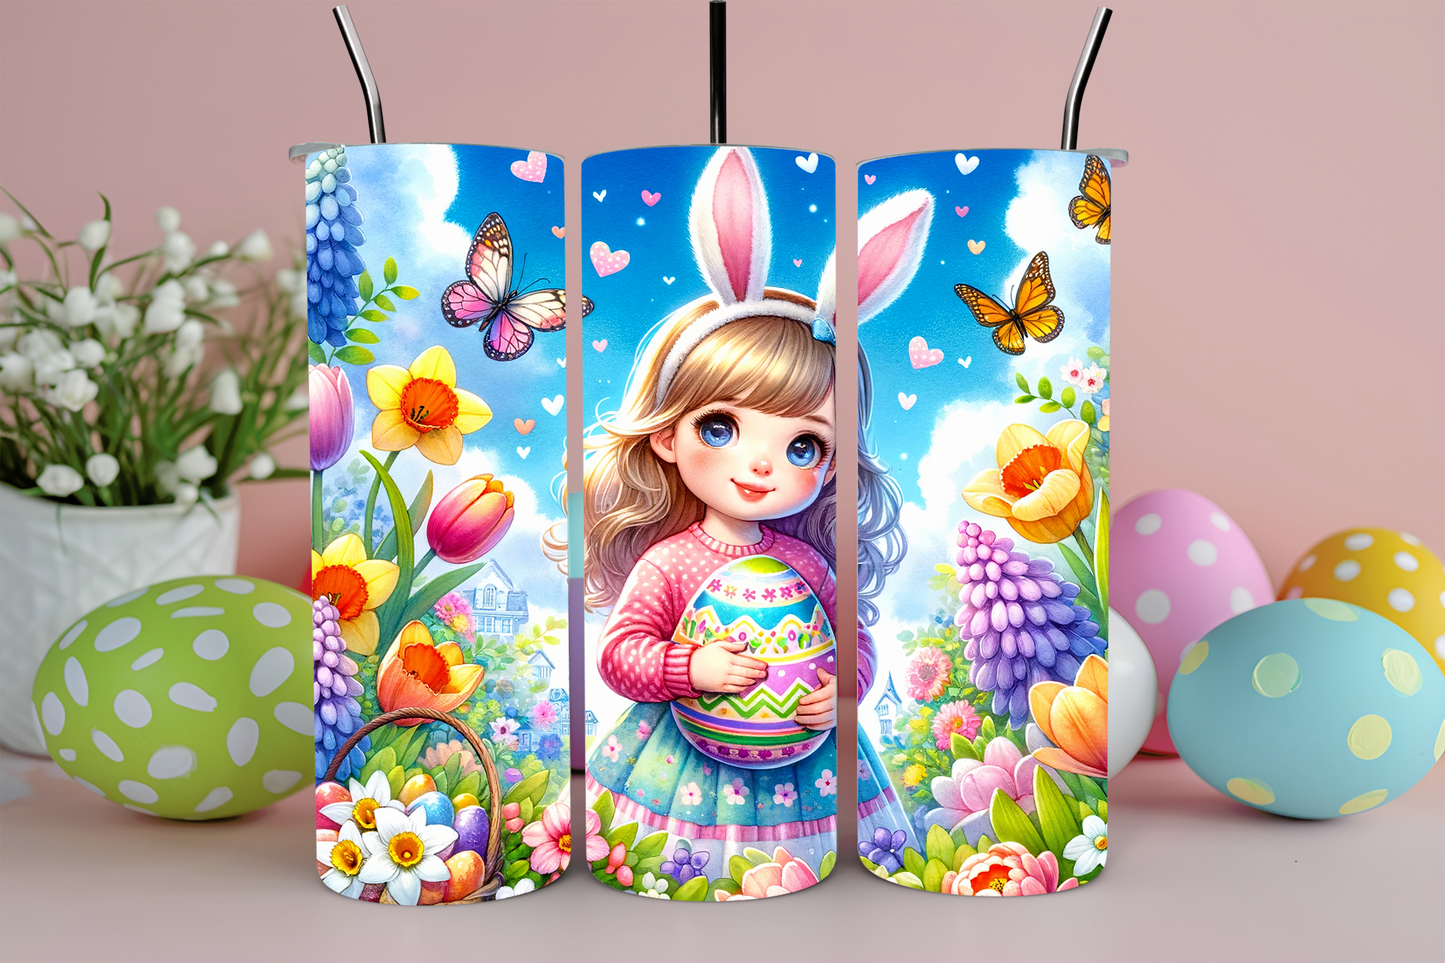 A Collection of A Variety of Easter Themed Tumblers